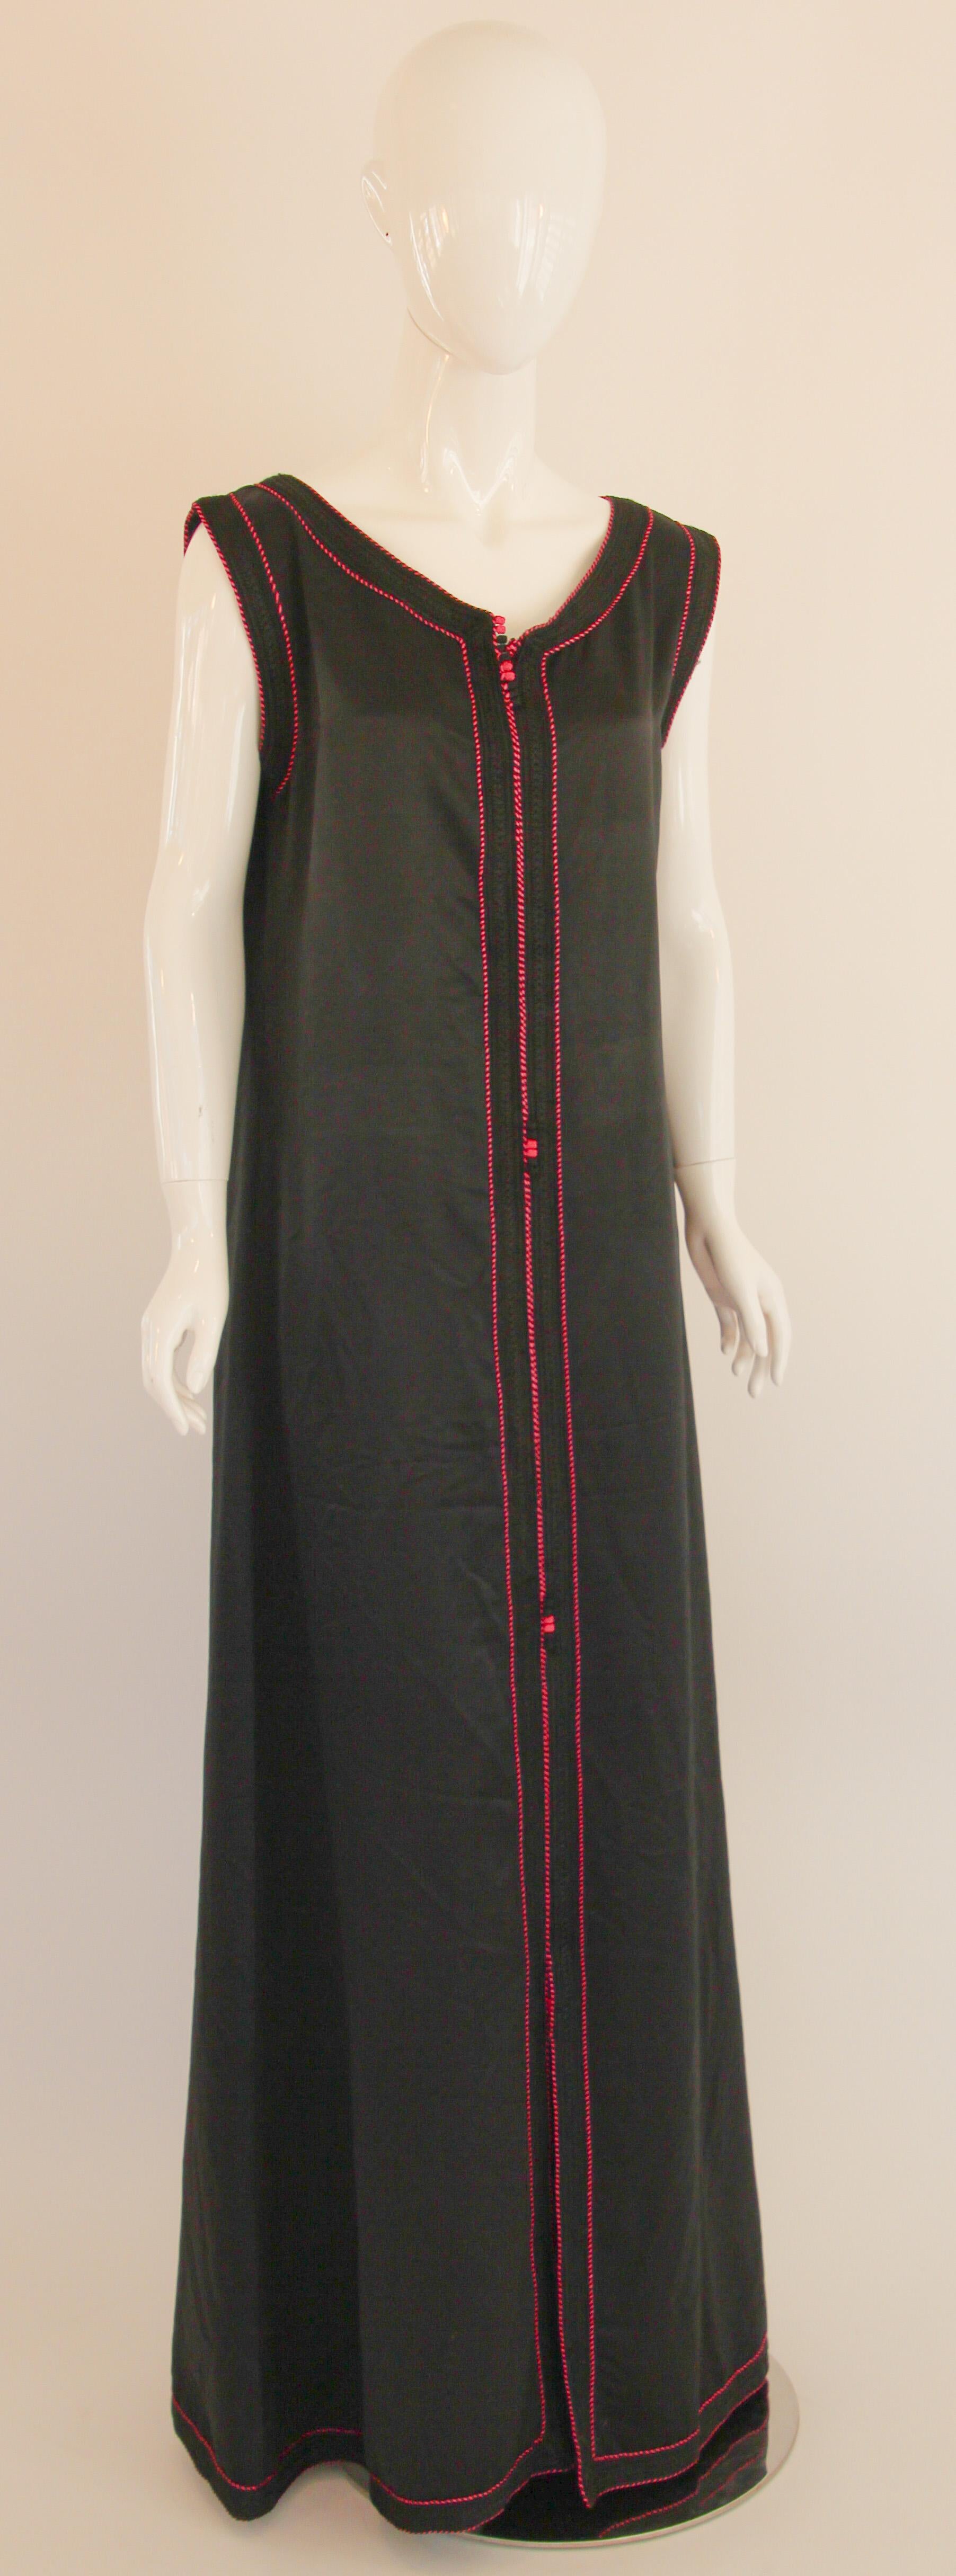 Vintage Caftan Sleeveless Black with Pink Embroidered, ca. 1980s For Sale 9